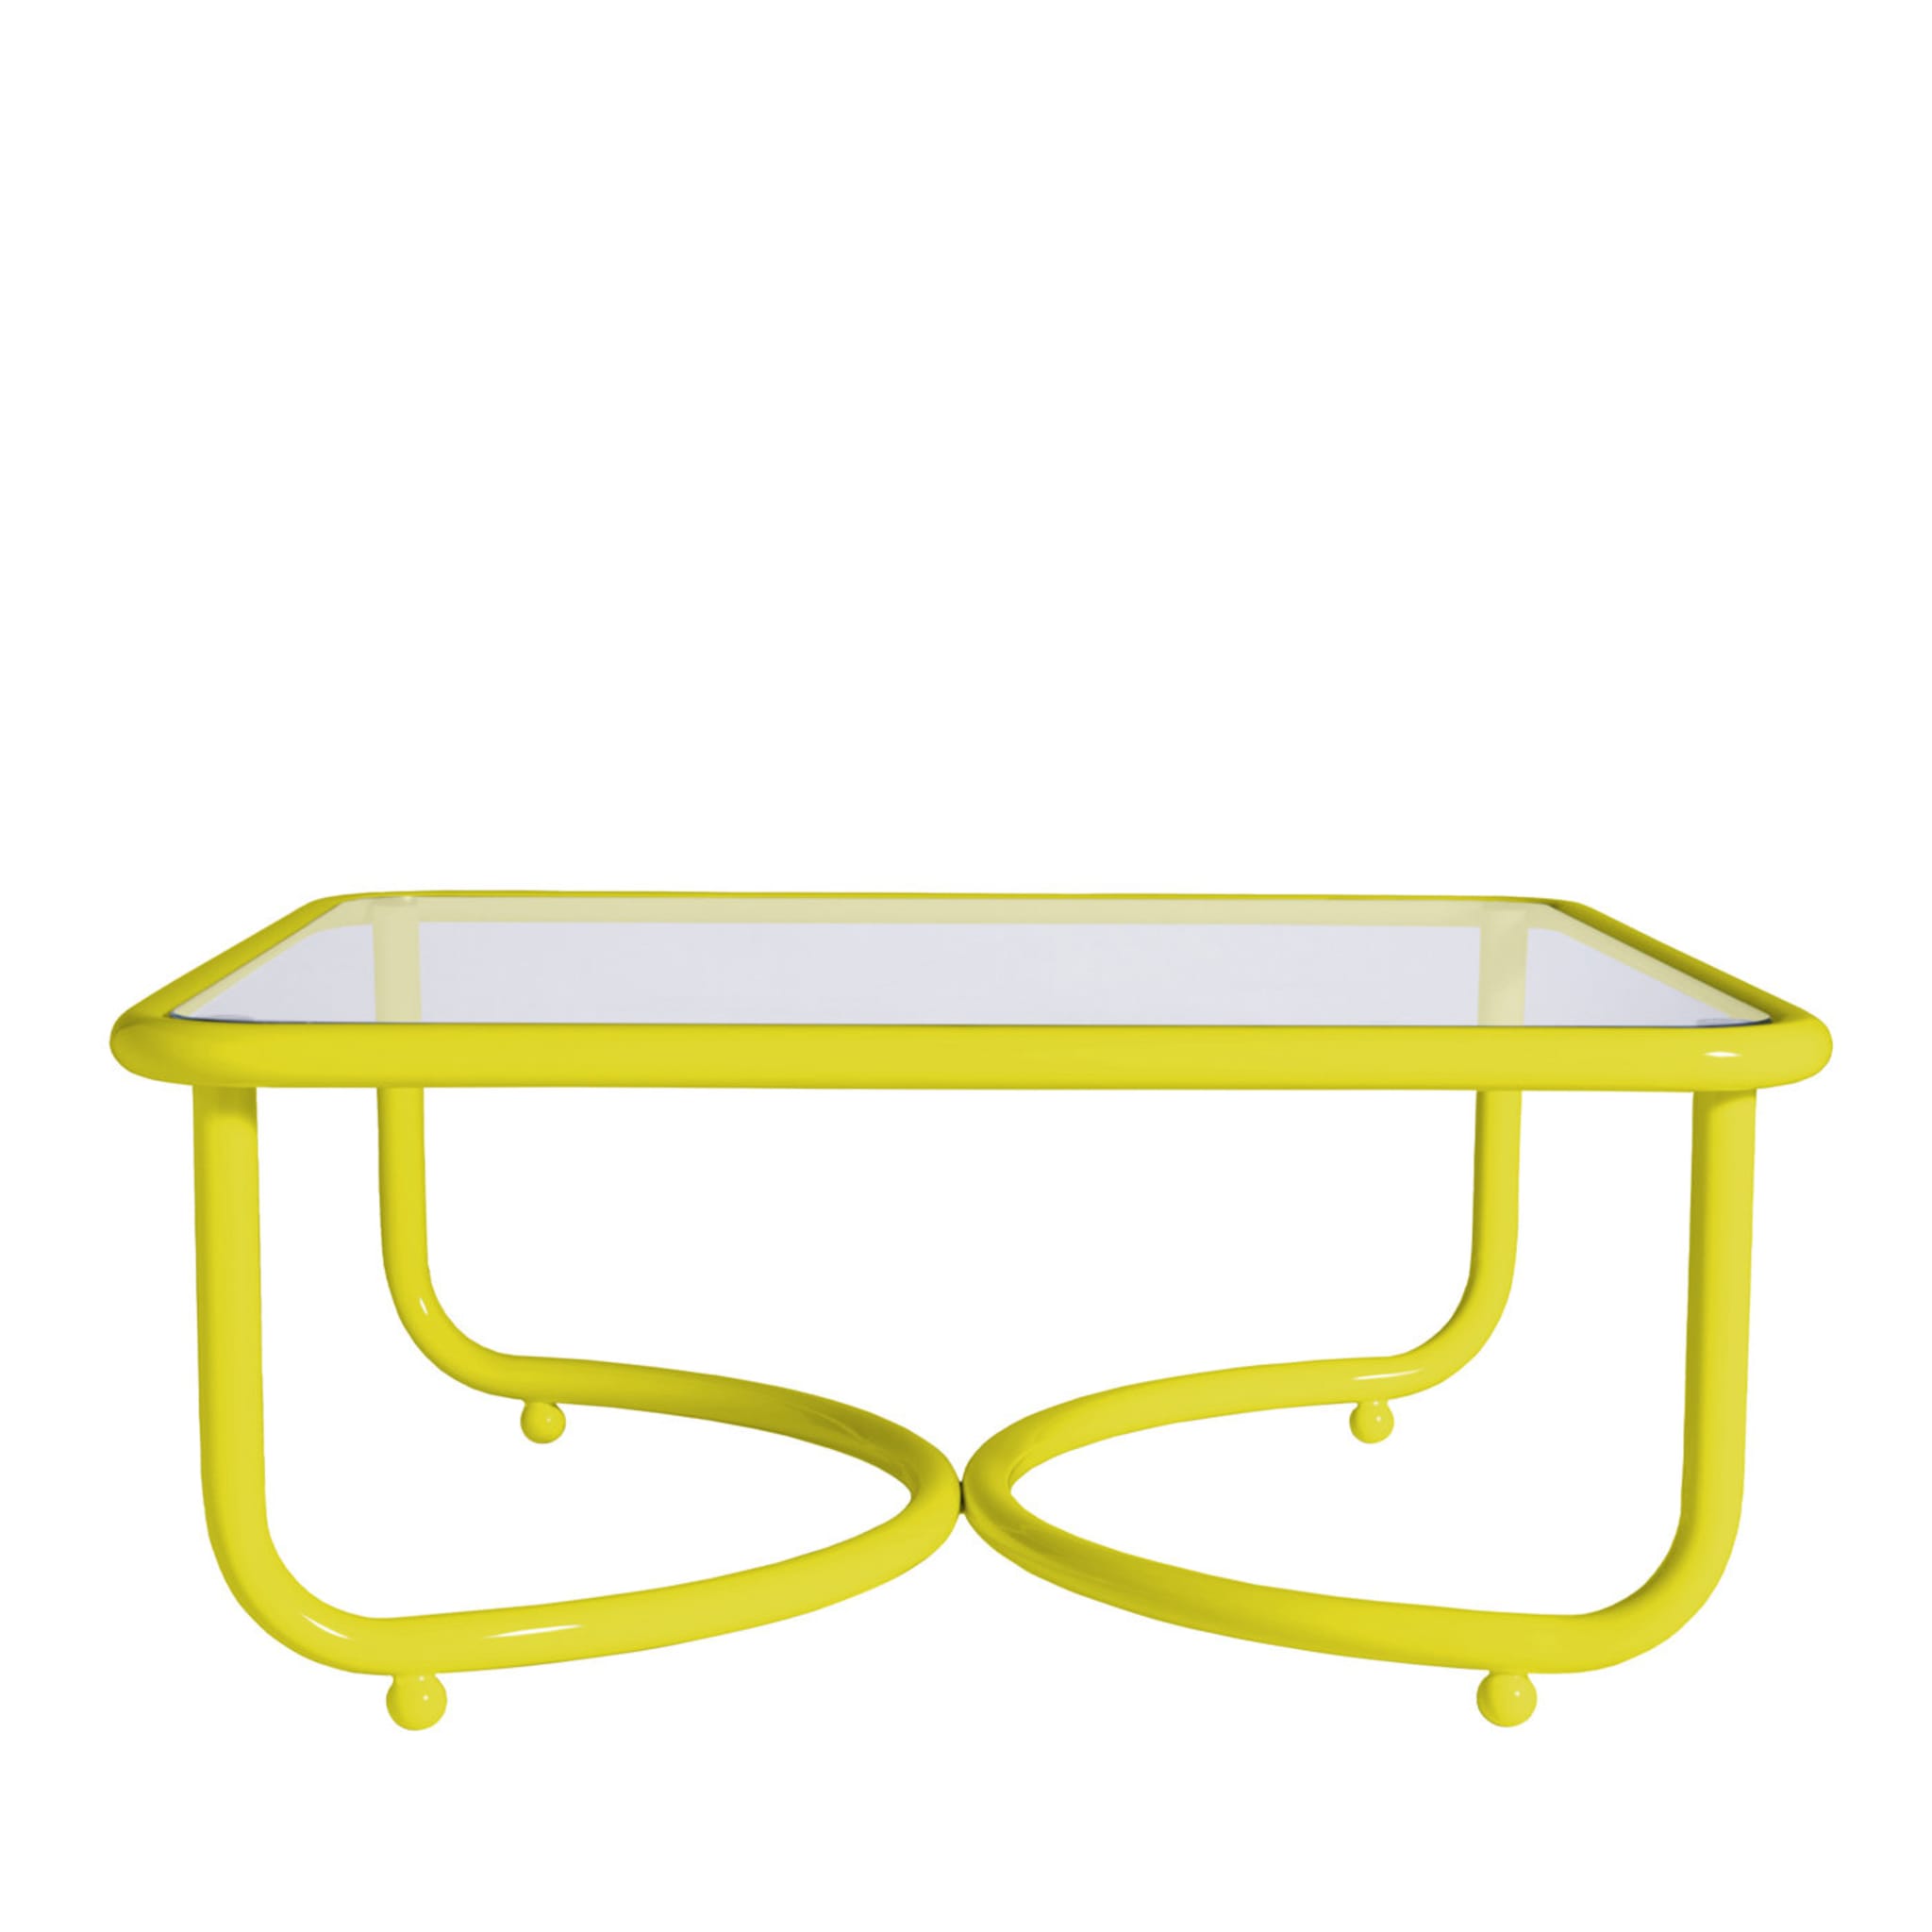 Locus Solus Low Yellow Table by Gae Aulenti - Main view